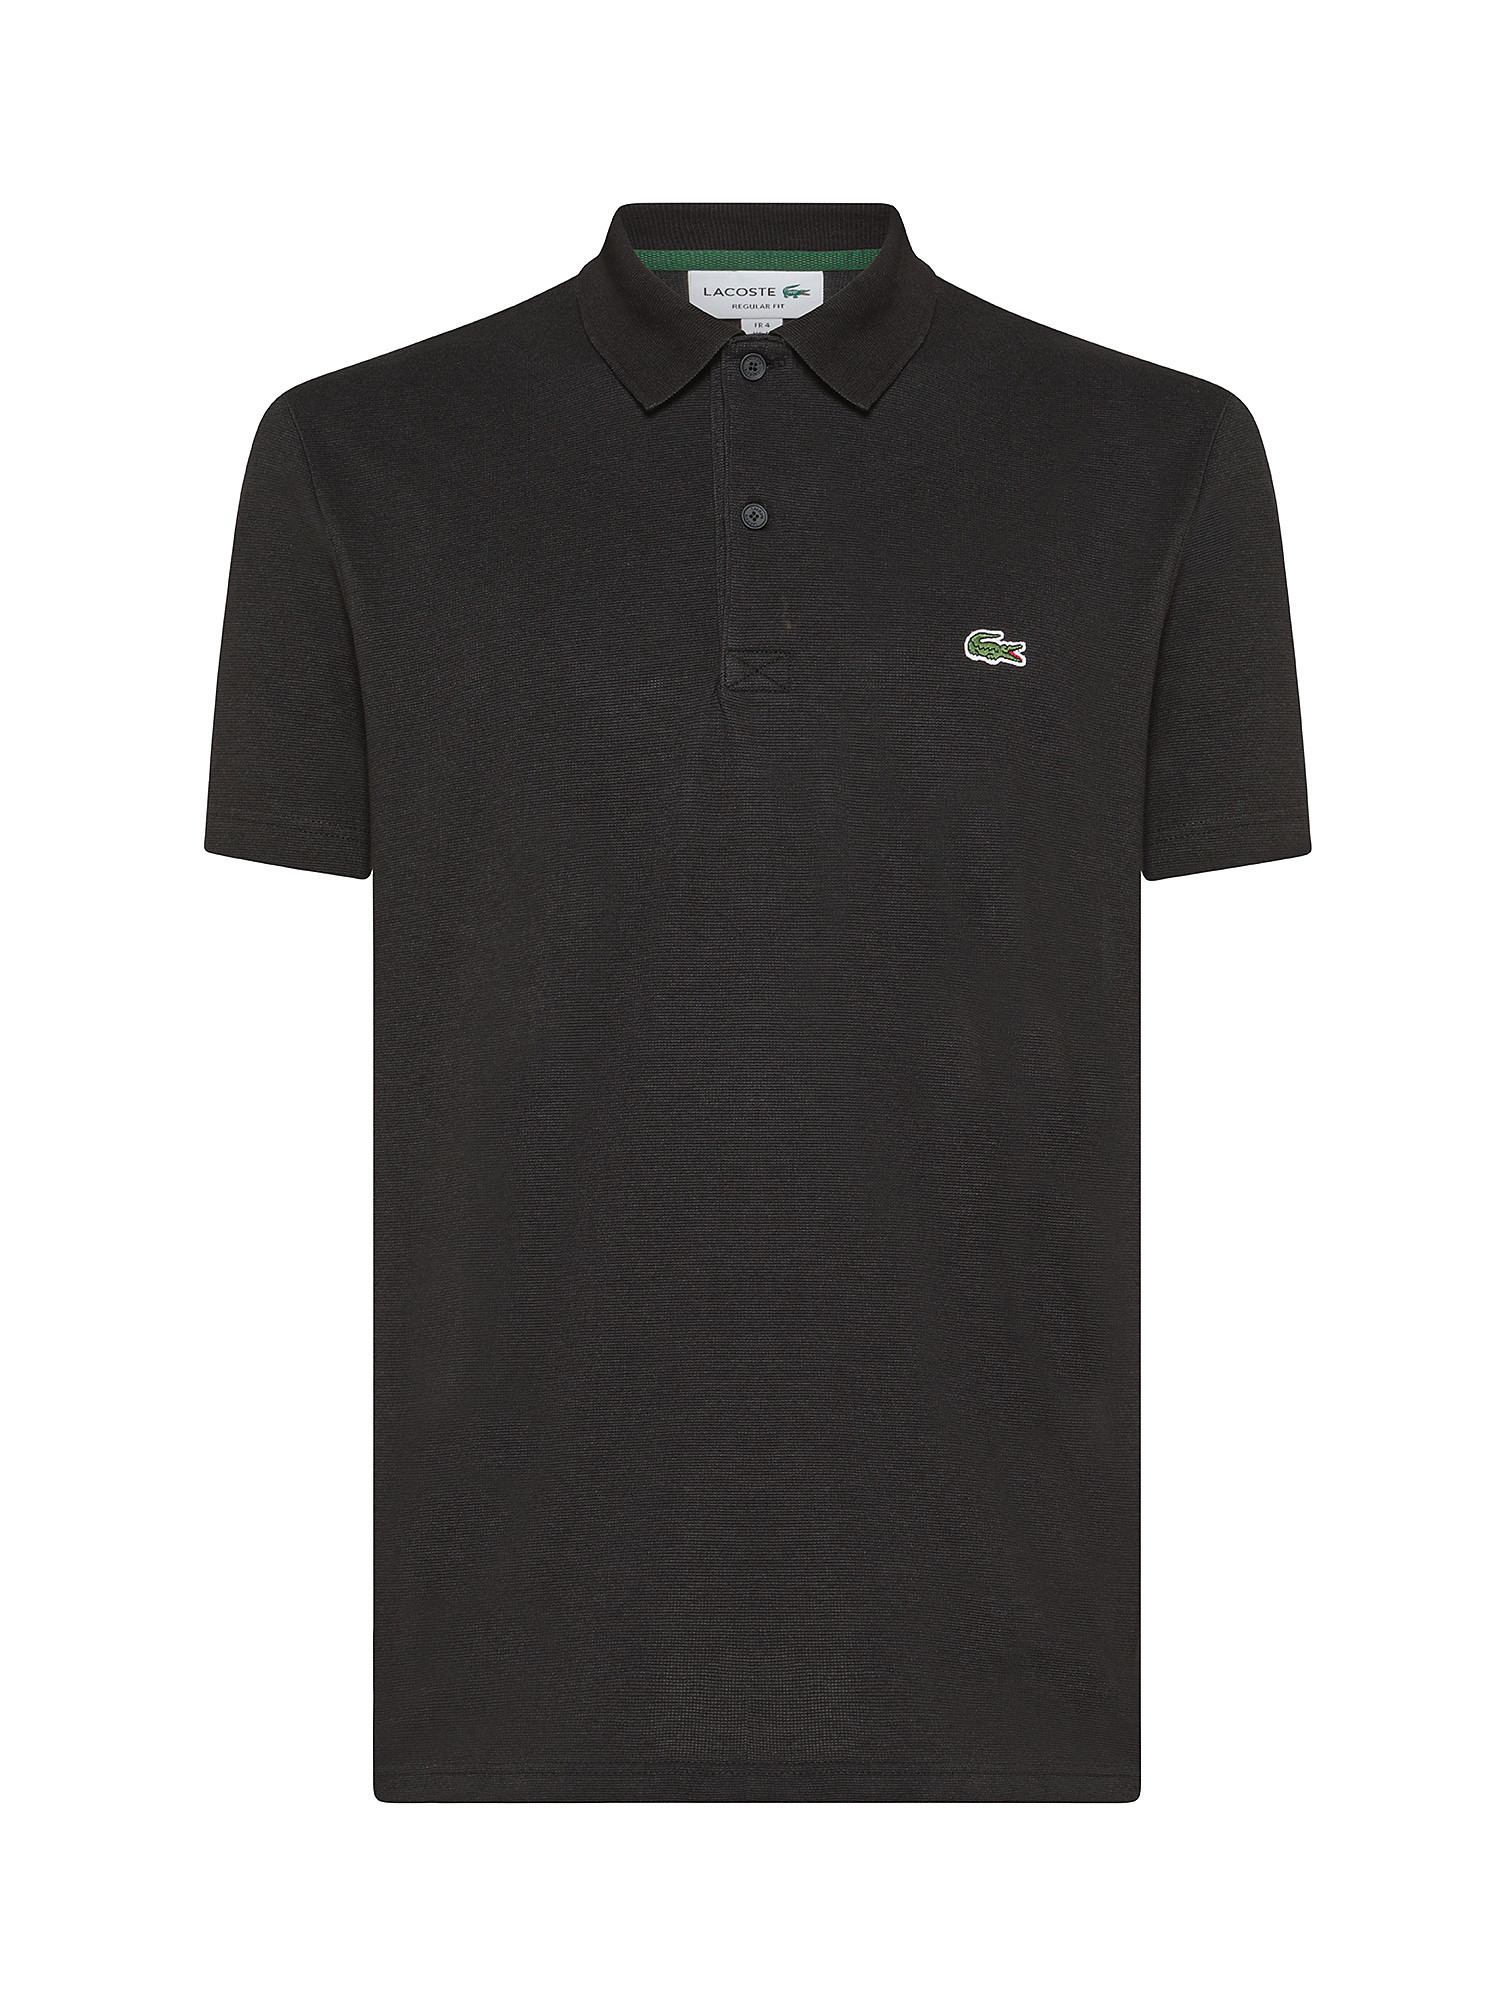 Lacoste - Polo stretch regular fit, Nero, large image number 0